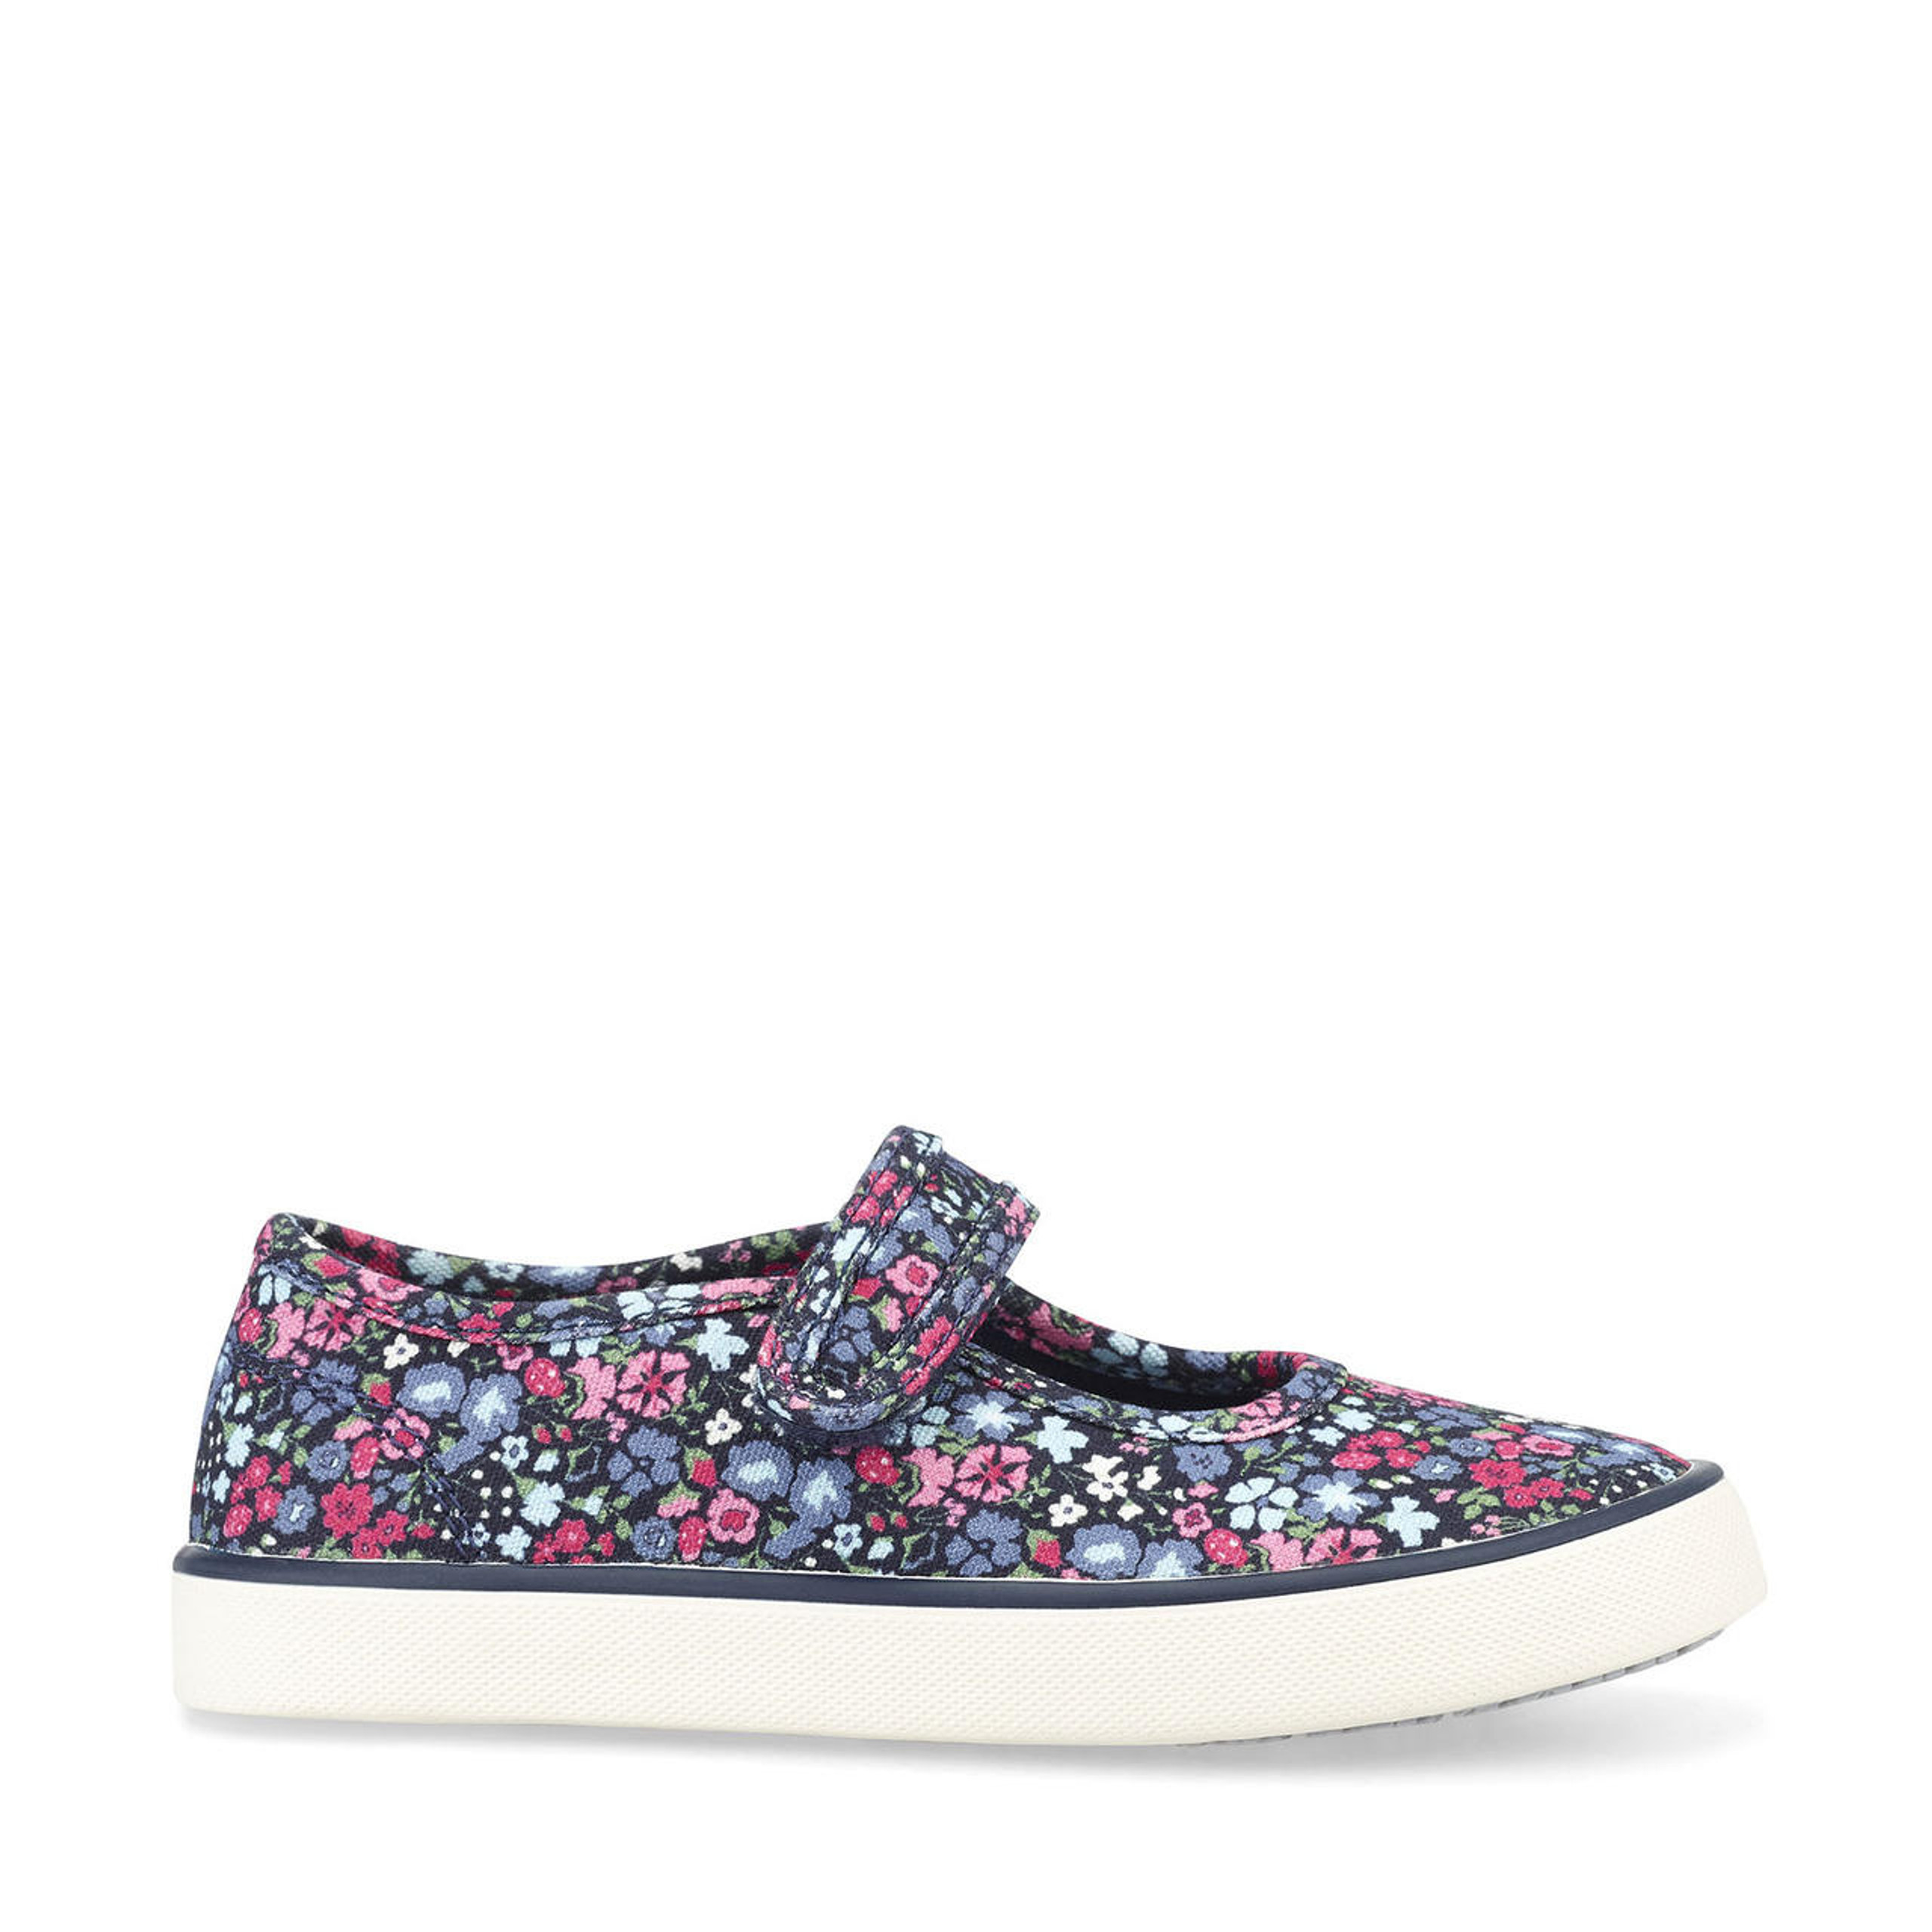 Girls Canvas Shoes | Canvas Shoes for Girls | Start-Rite Shoes